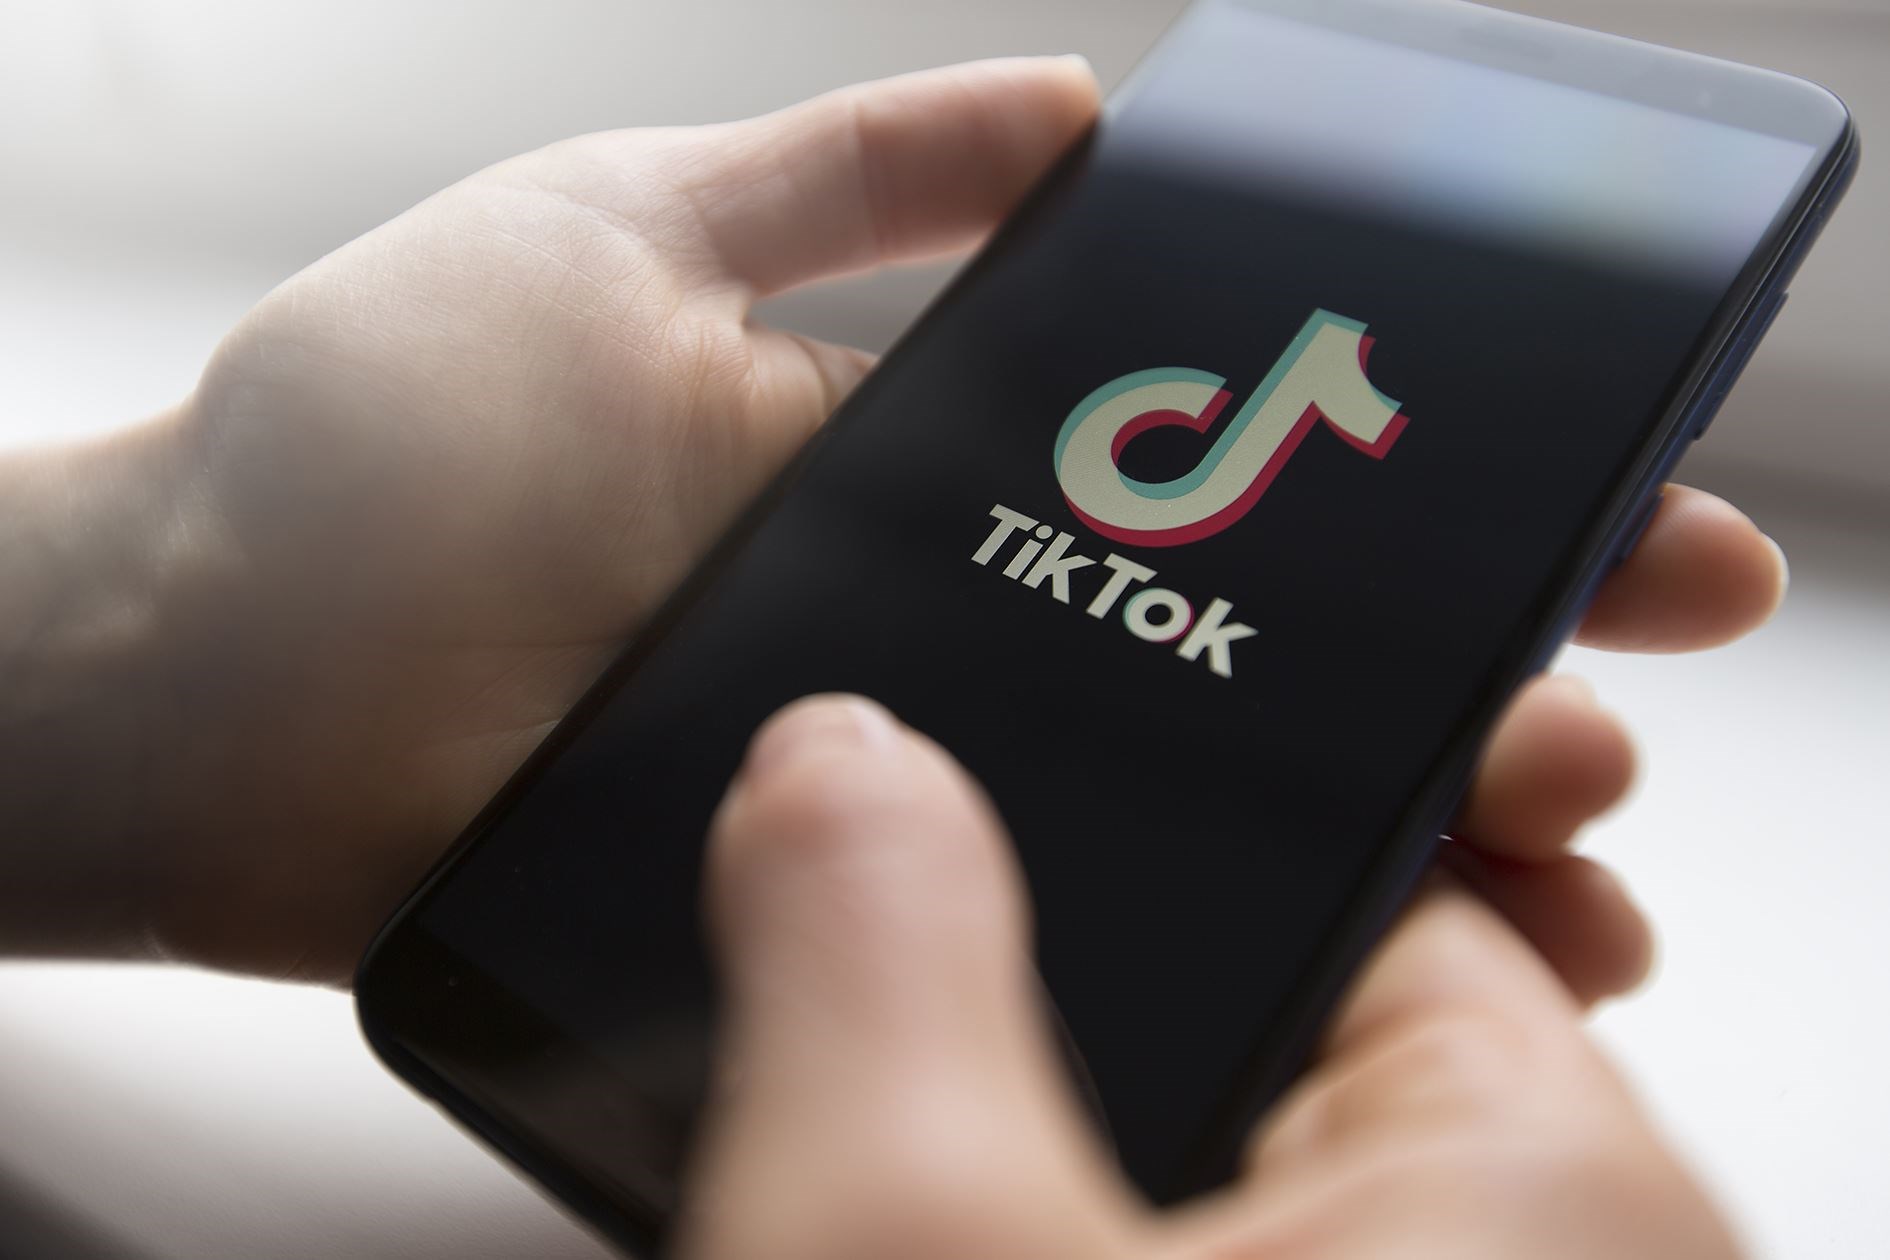 Researchers found a fourfold increase in the level of misogynistic content on the ‘For You’ page of TikTok accounts over just five days on the platform.